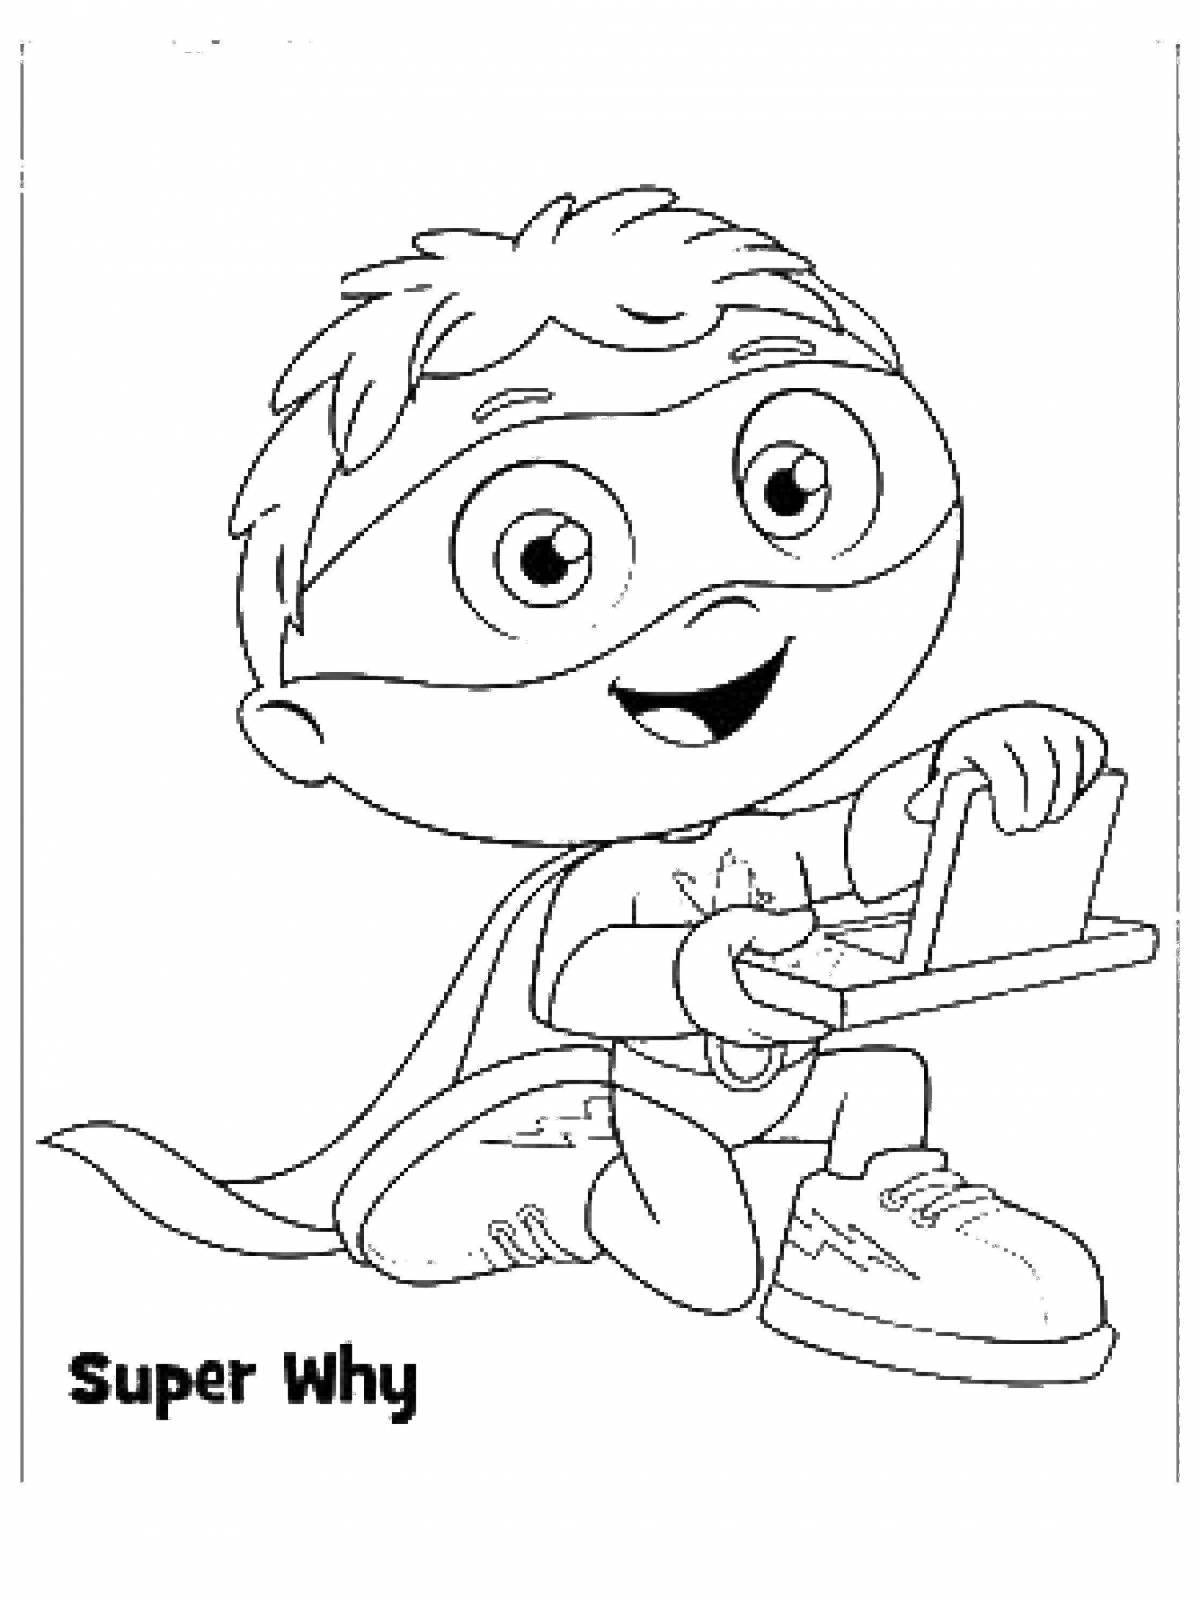 Tom chase's adorable coloring book